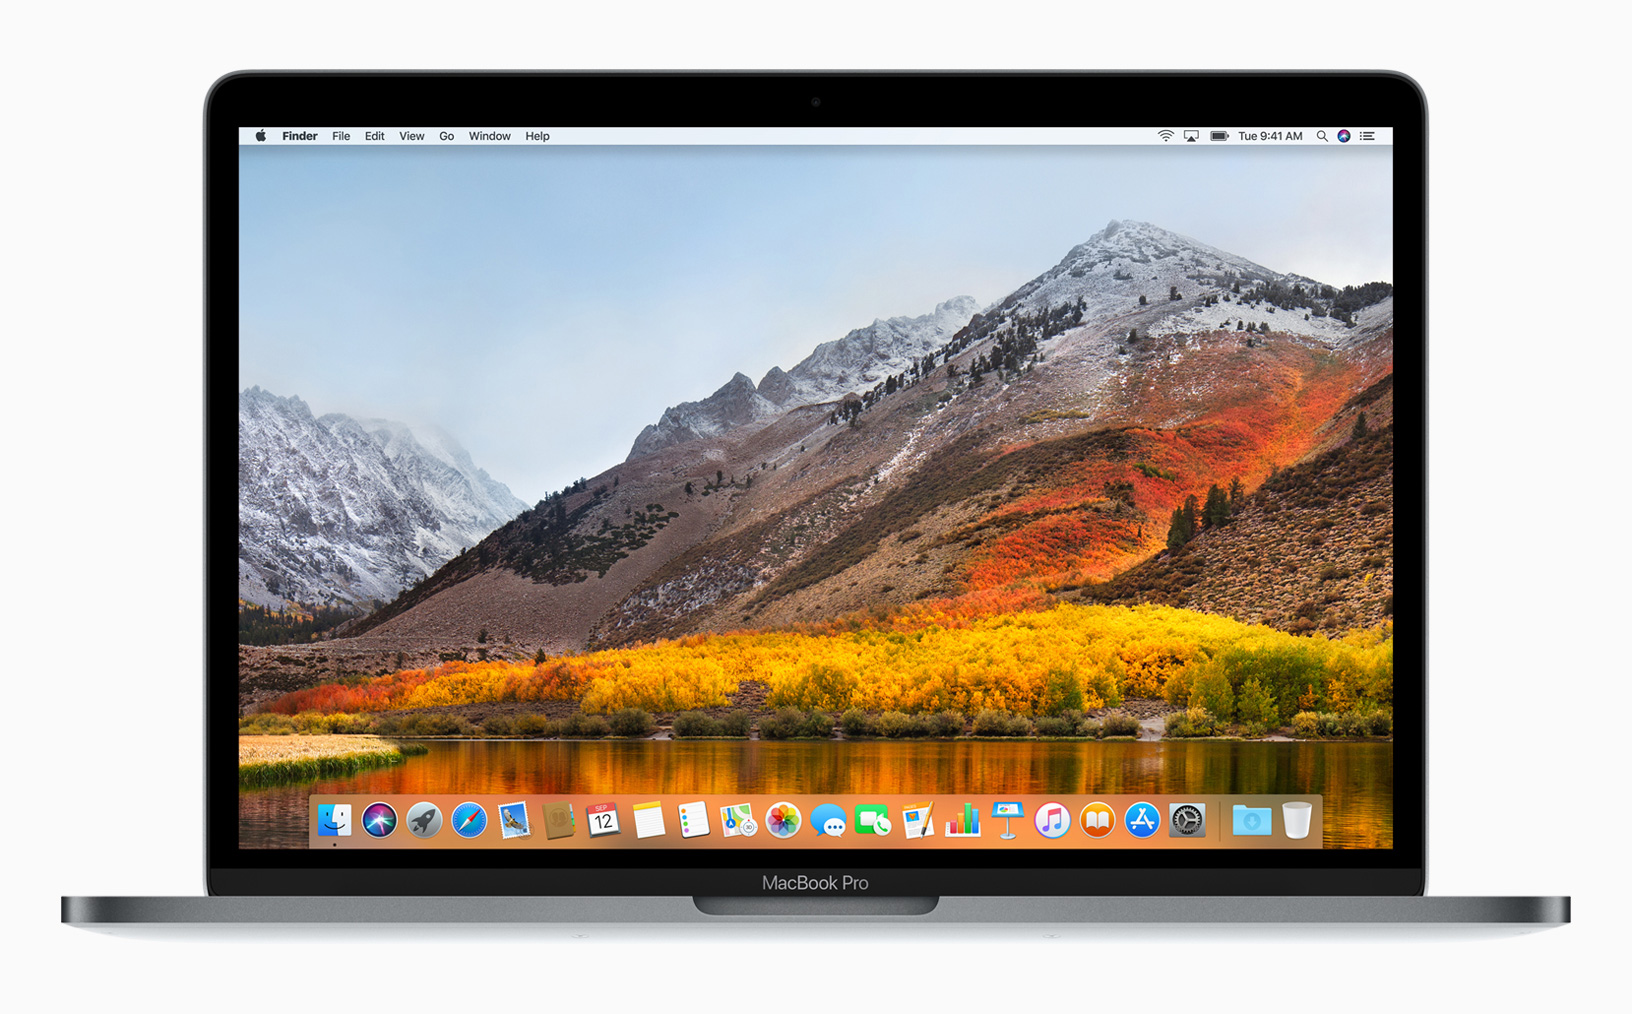 download the new High Sierra